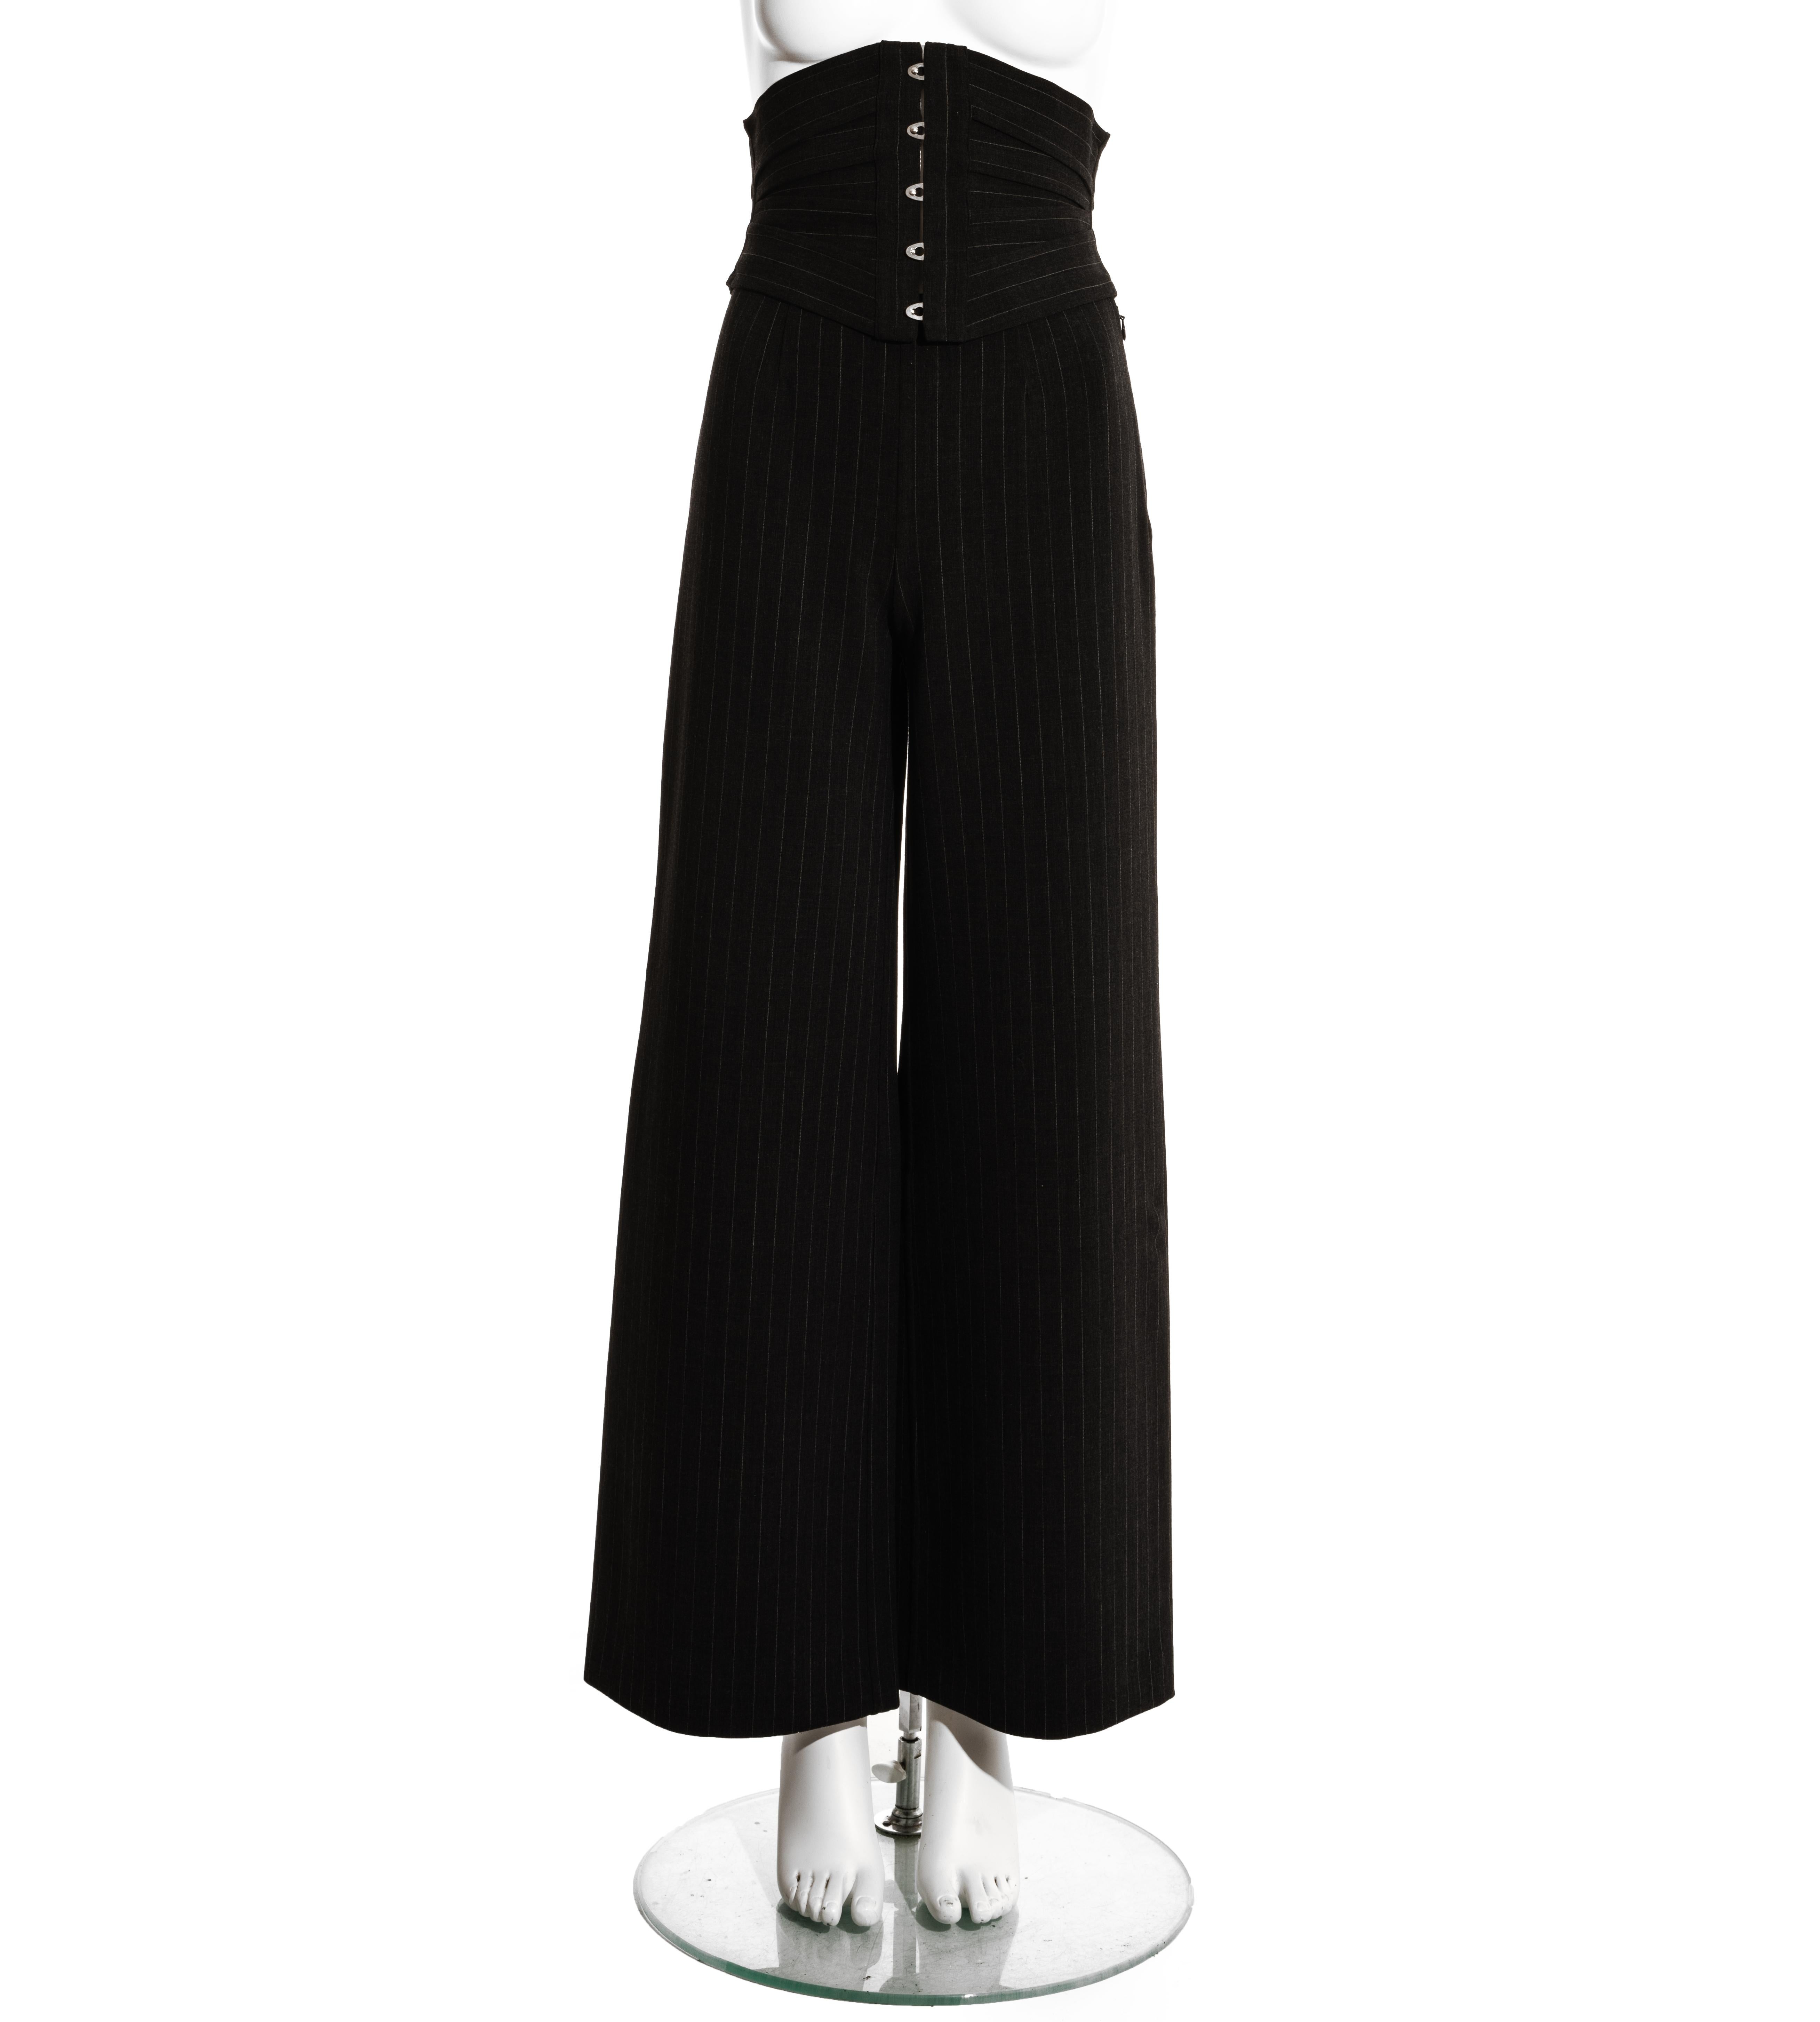 Black Jean Paul Gaultier grey pinstripe wool three piece corseted pant suit, c. 2000s For Sale